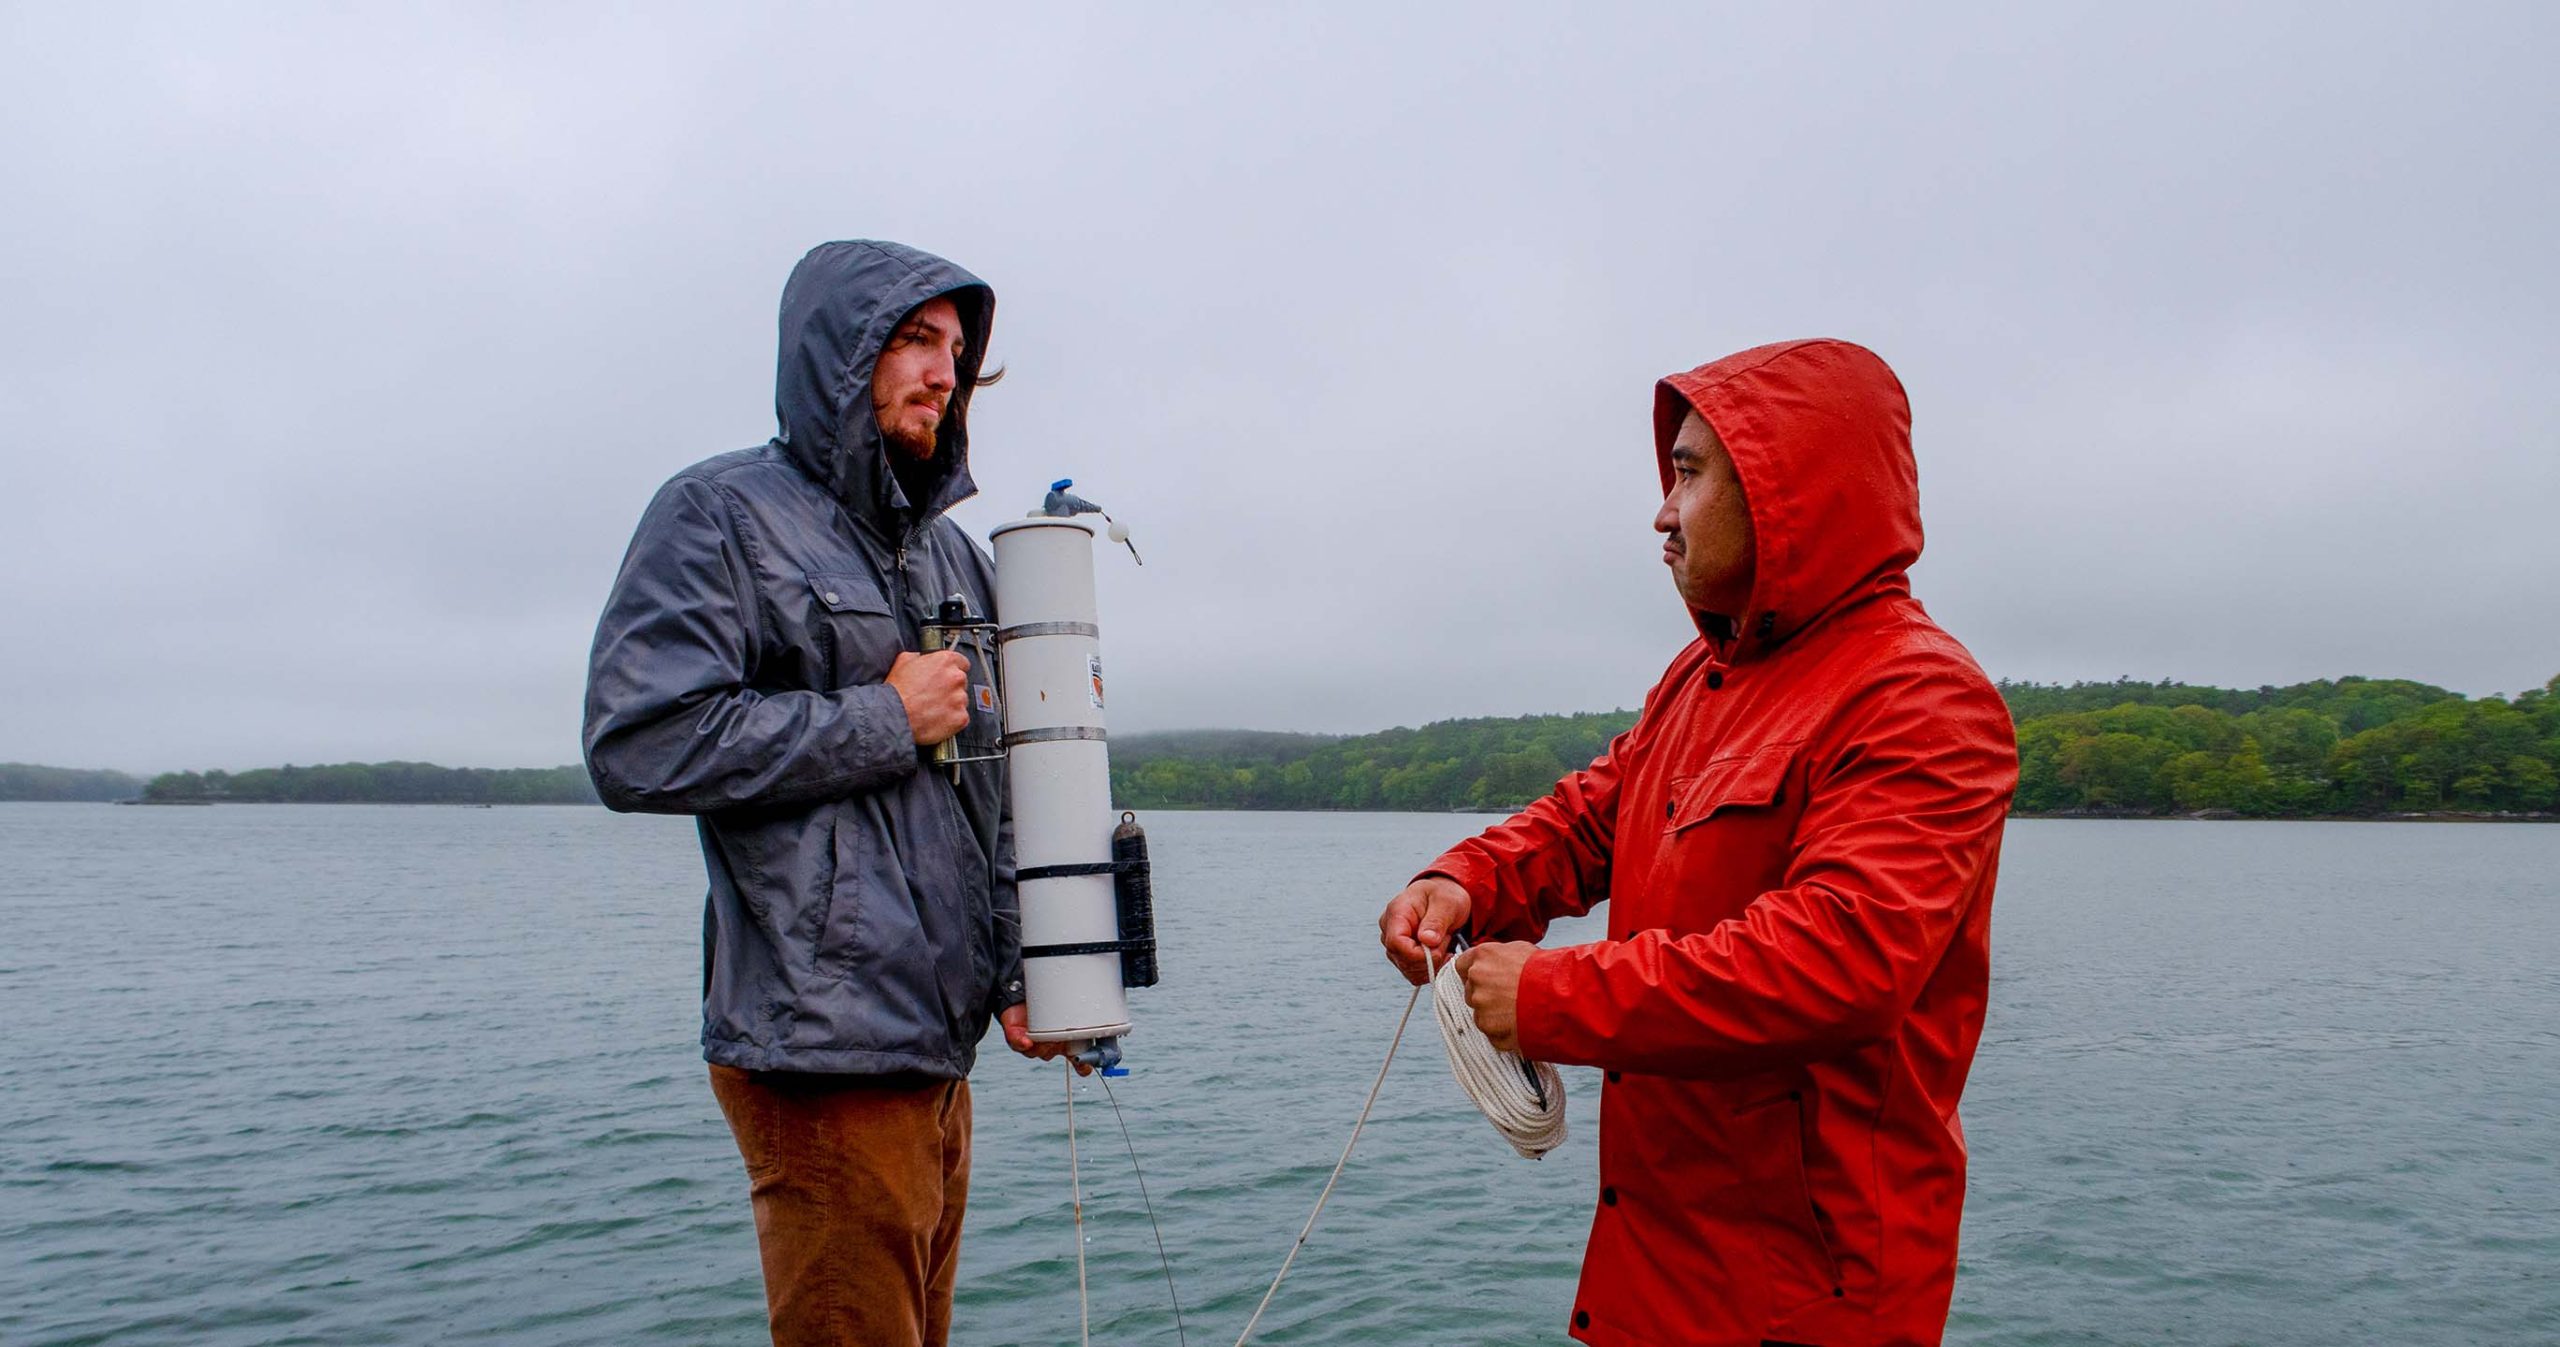 Two men stand on a dock looking at each other while wearing raincoats